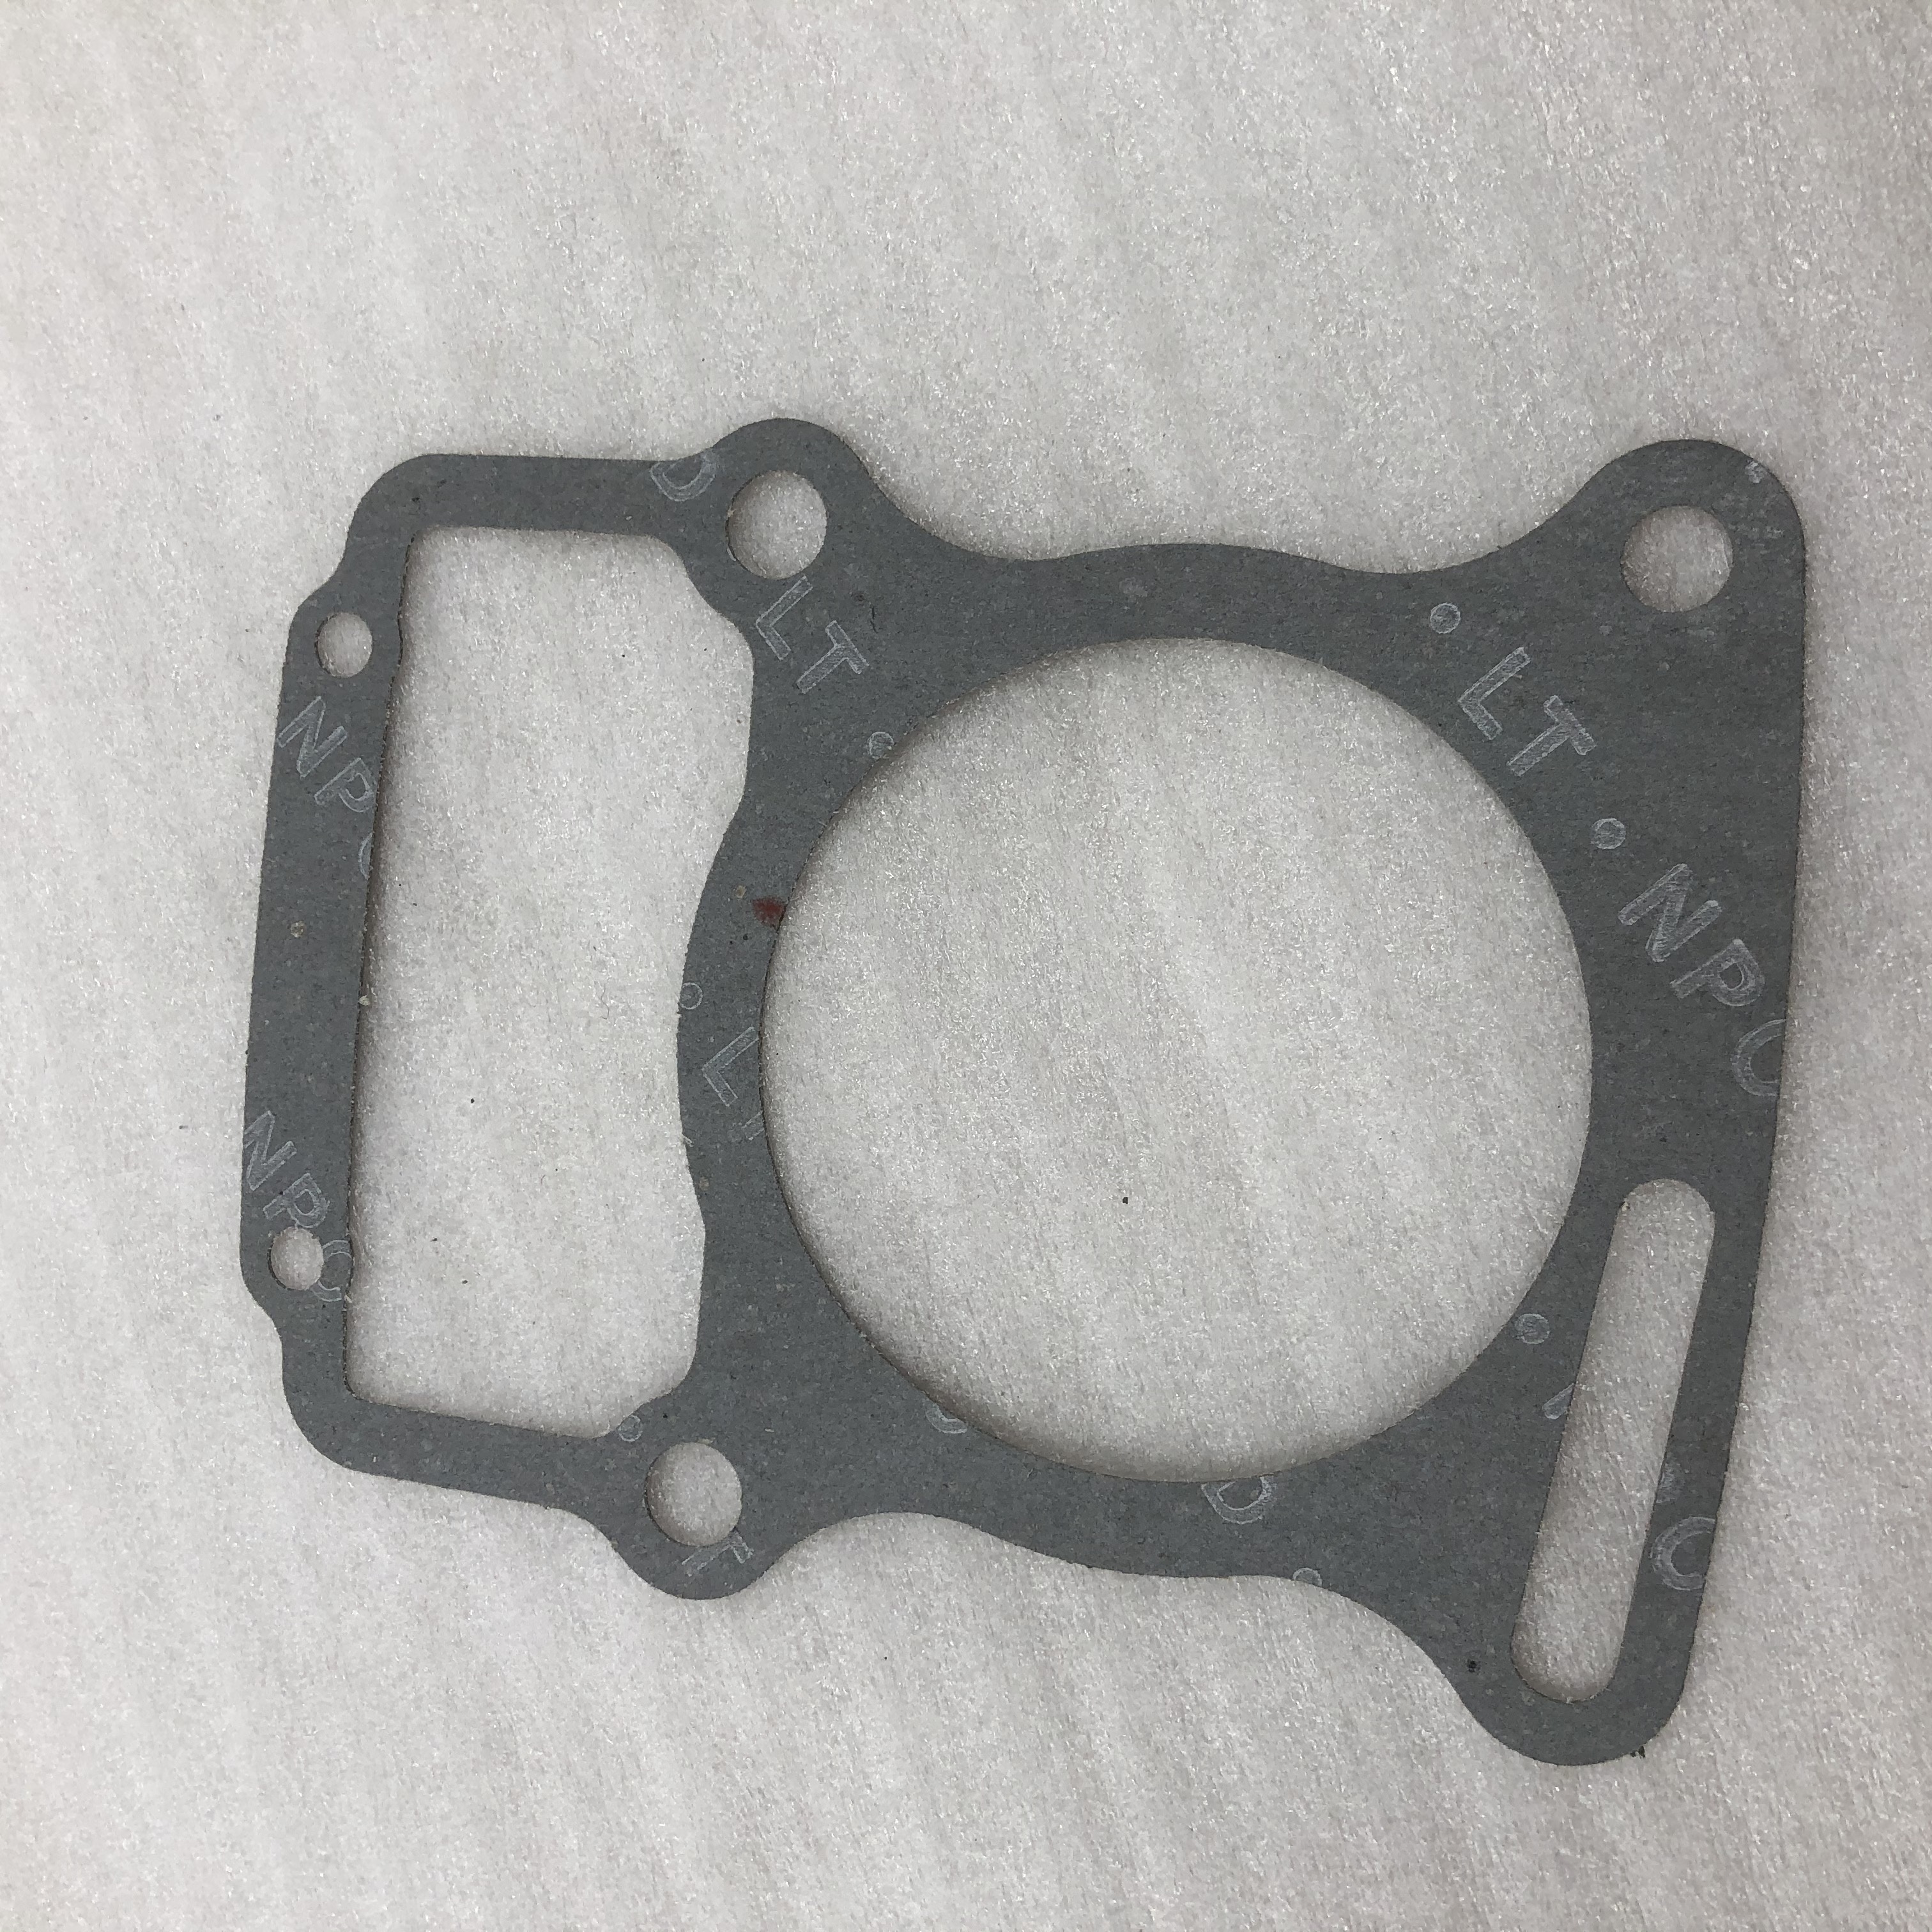 DAYANG high quality factory direct sale SB250 tsunami water-cooled tricycle motorcycle parts  engine cylinder block gasket